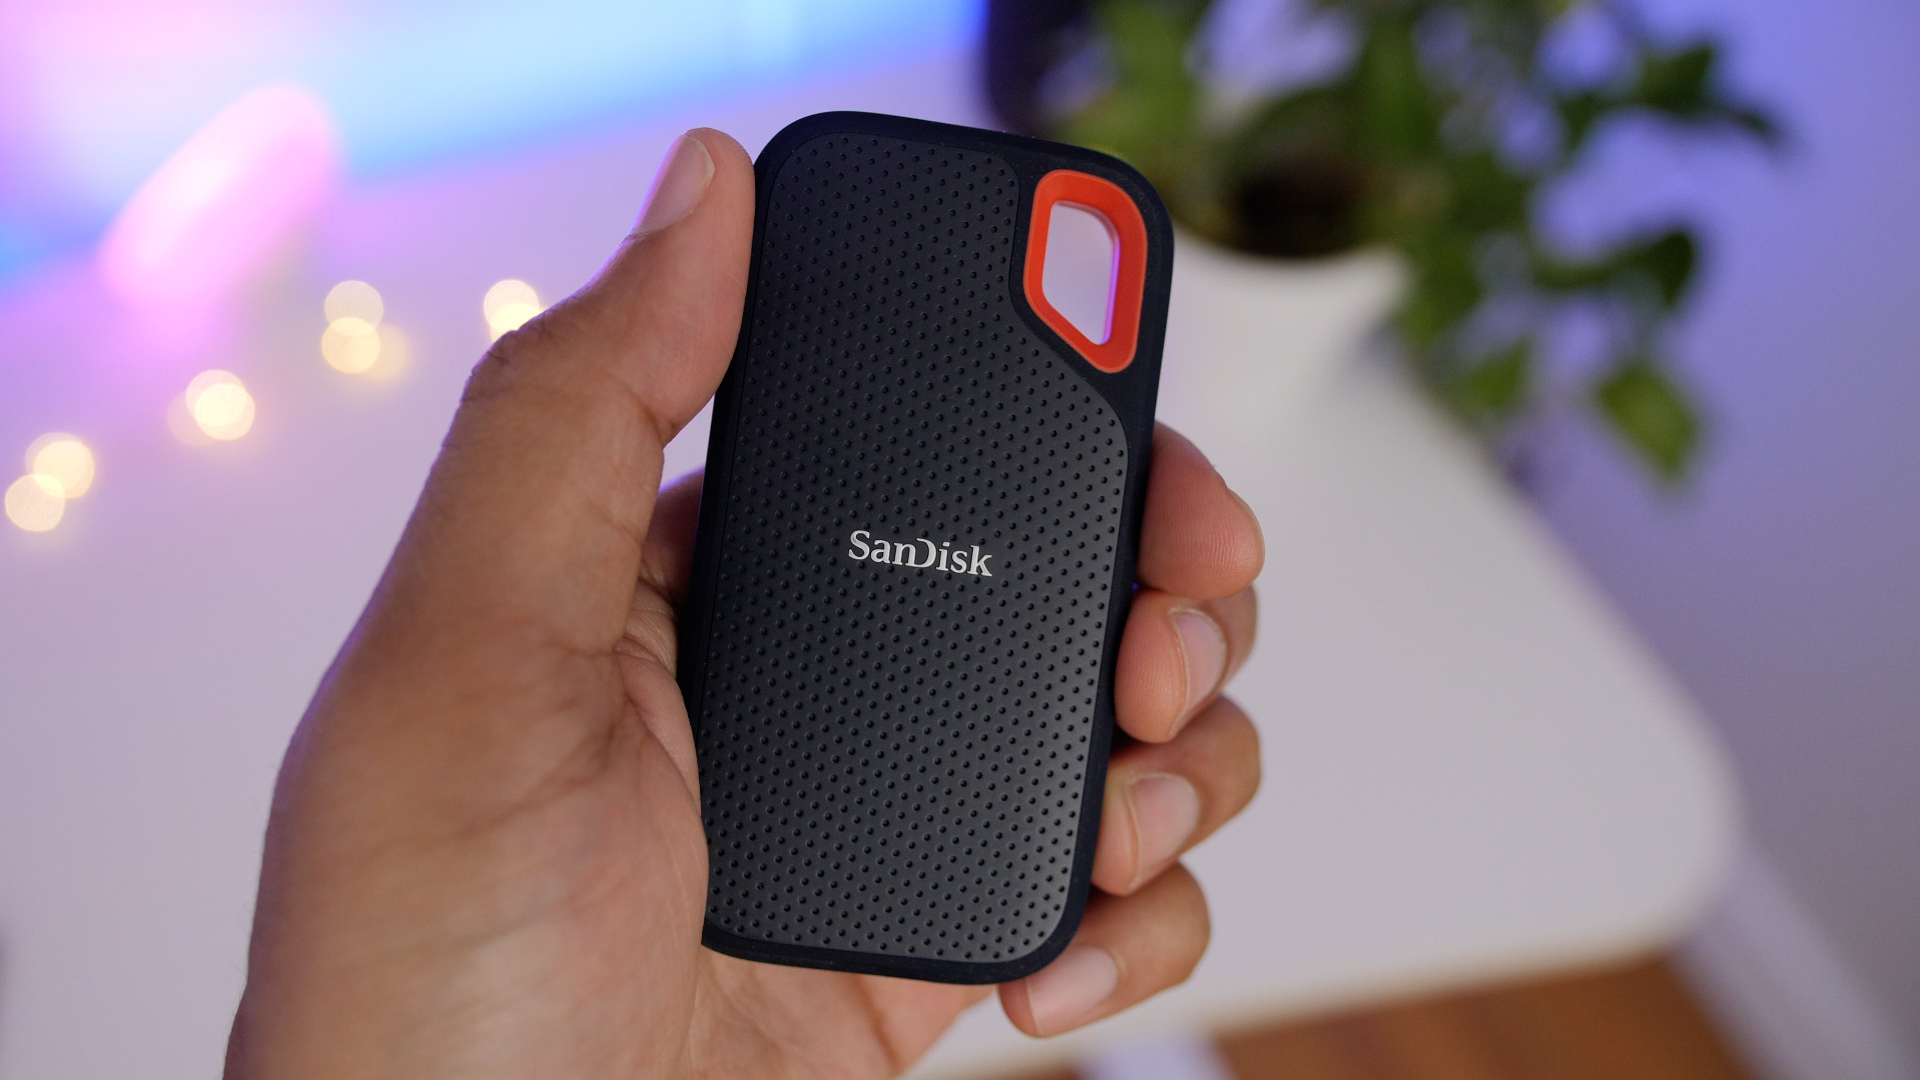 Review: Samsung's new portable SSD launches today - 9to5Toys